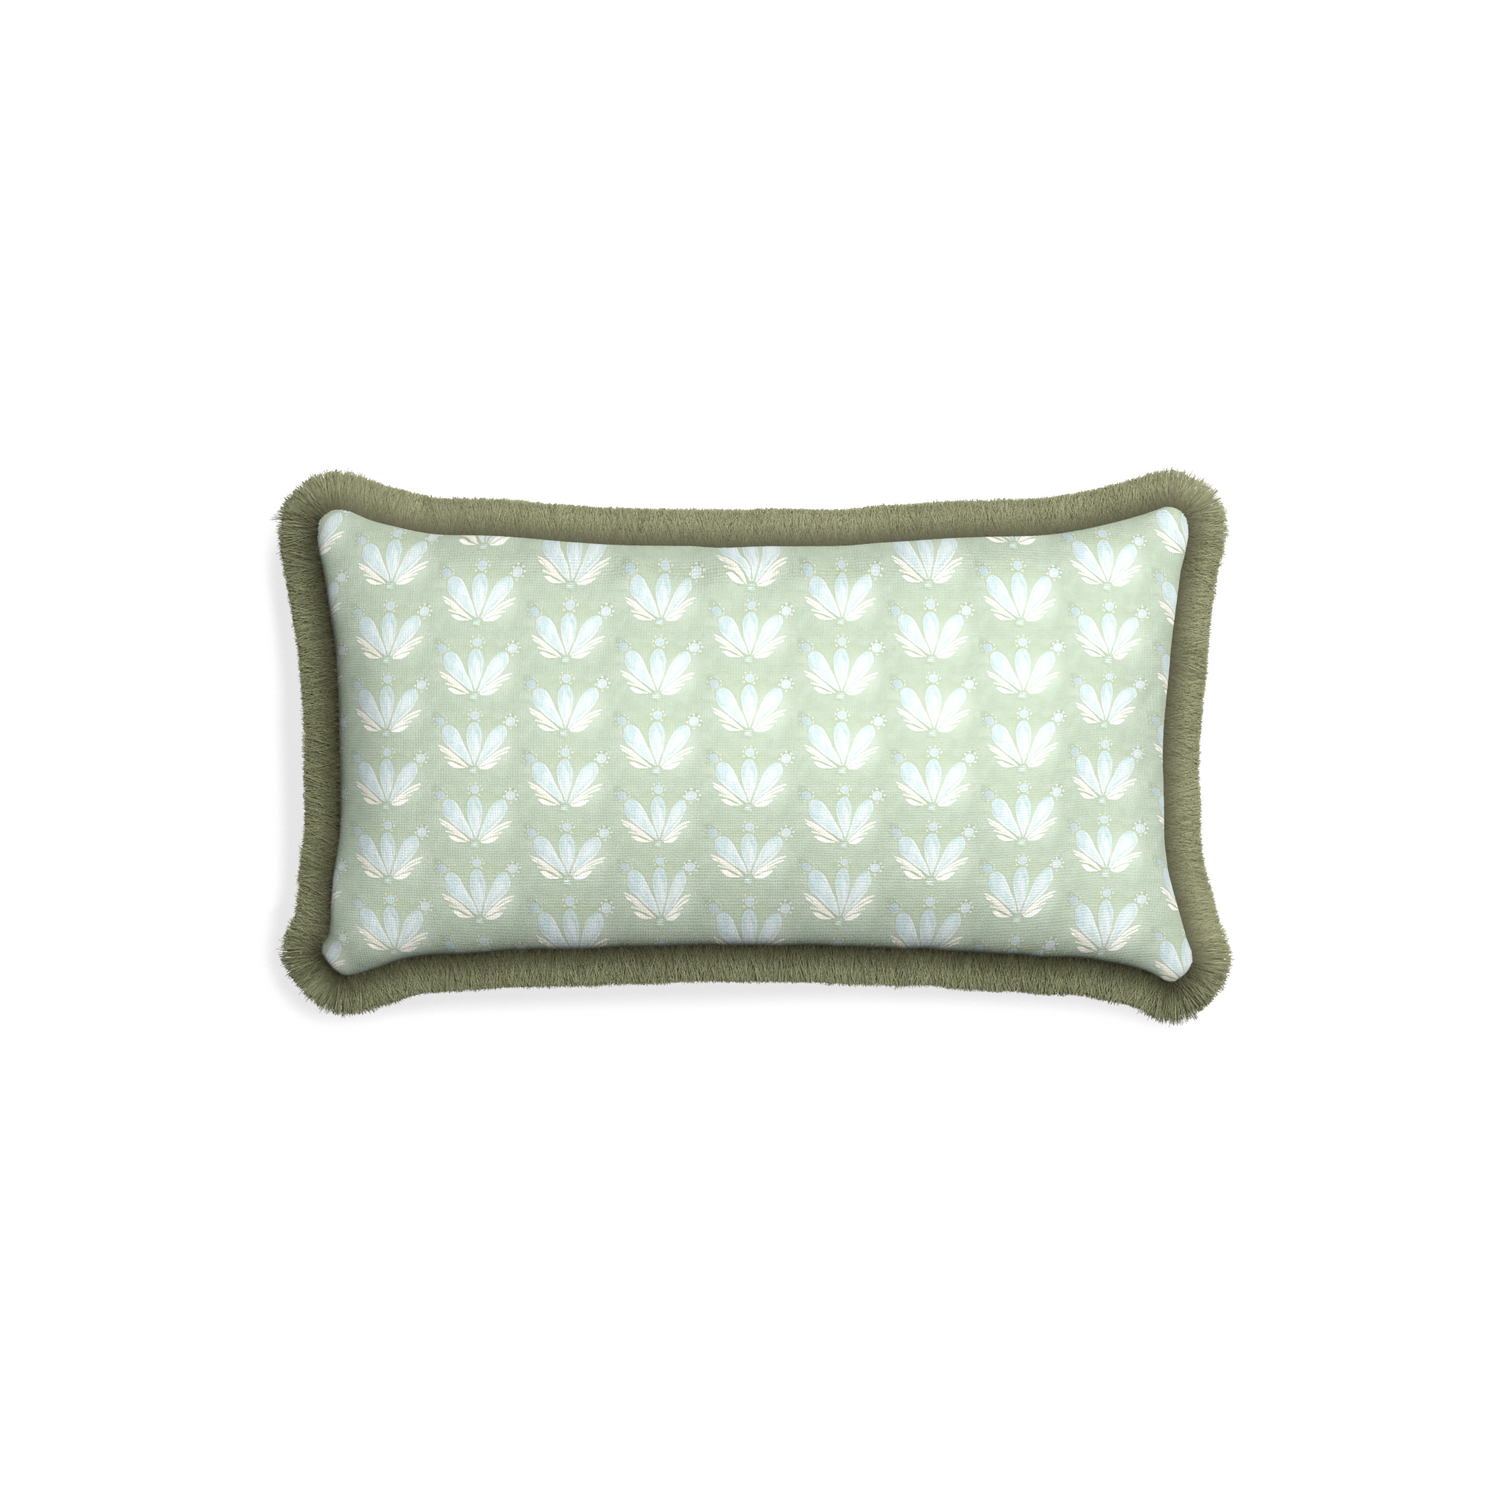 Petite-lumbar serena sea salt custom blue & green floral drop repeatpillow with sage fringe on white background